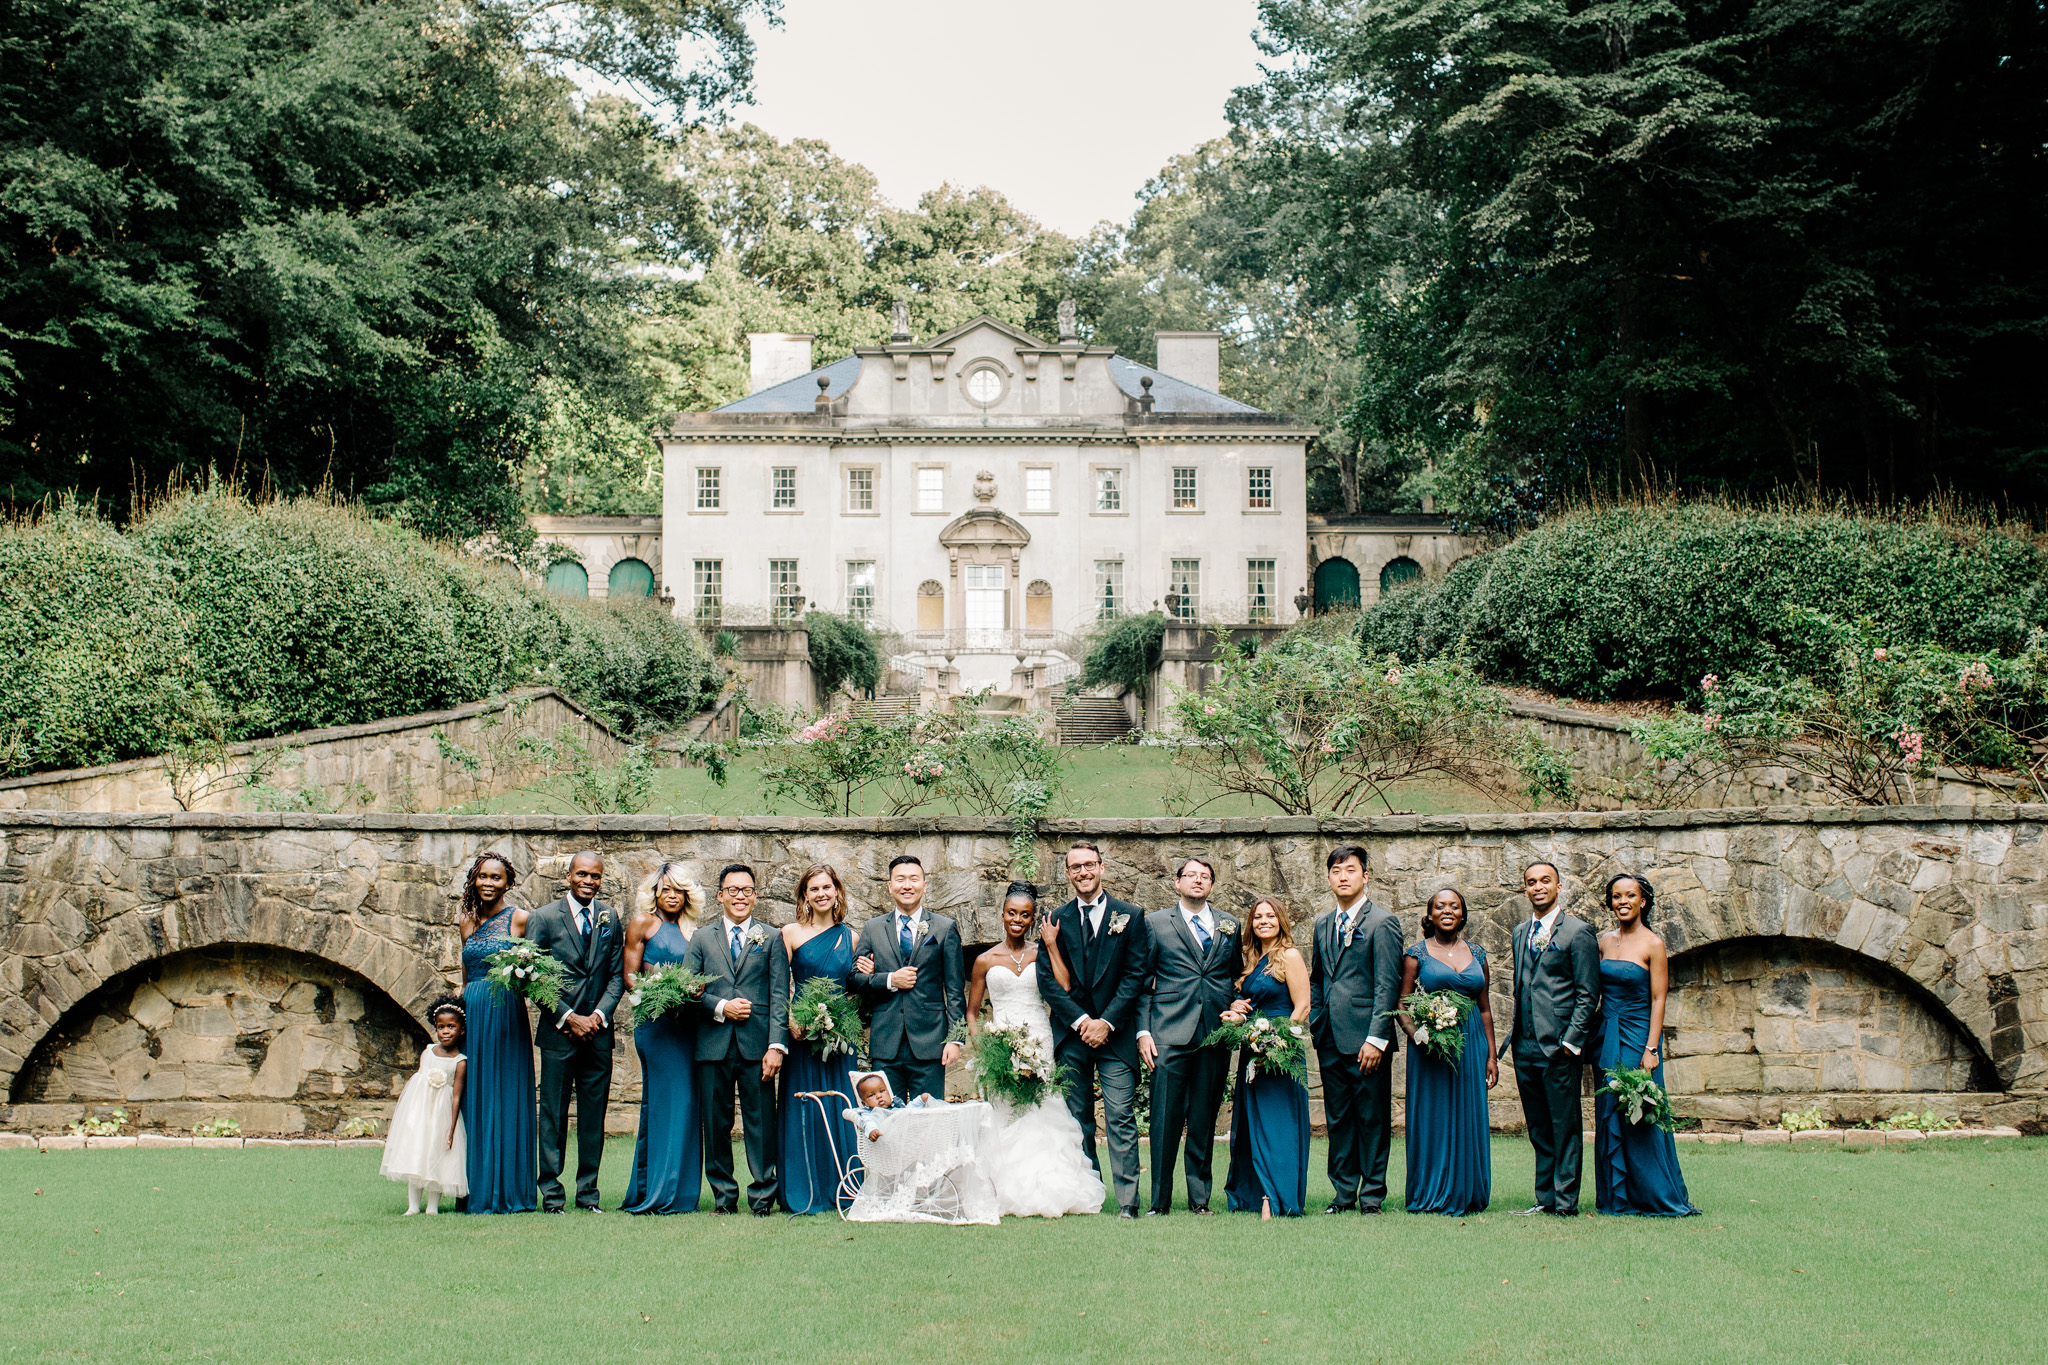 This bridal party group shot in front of the Swan House was captured by Atlanta based photographer Rebecca Cerasani